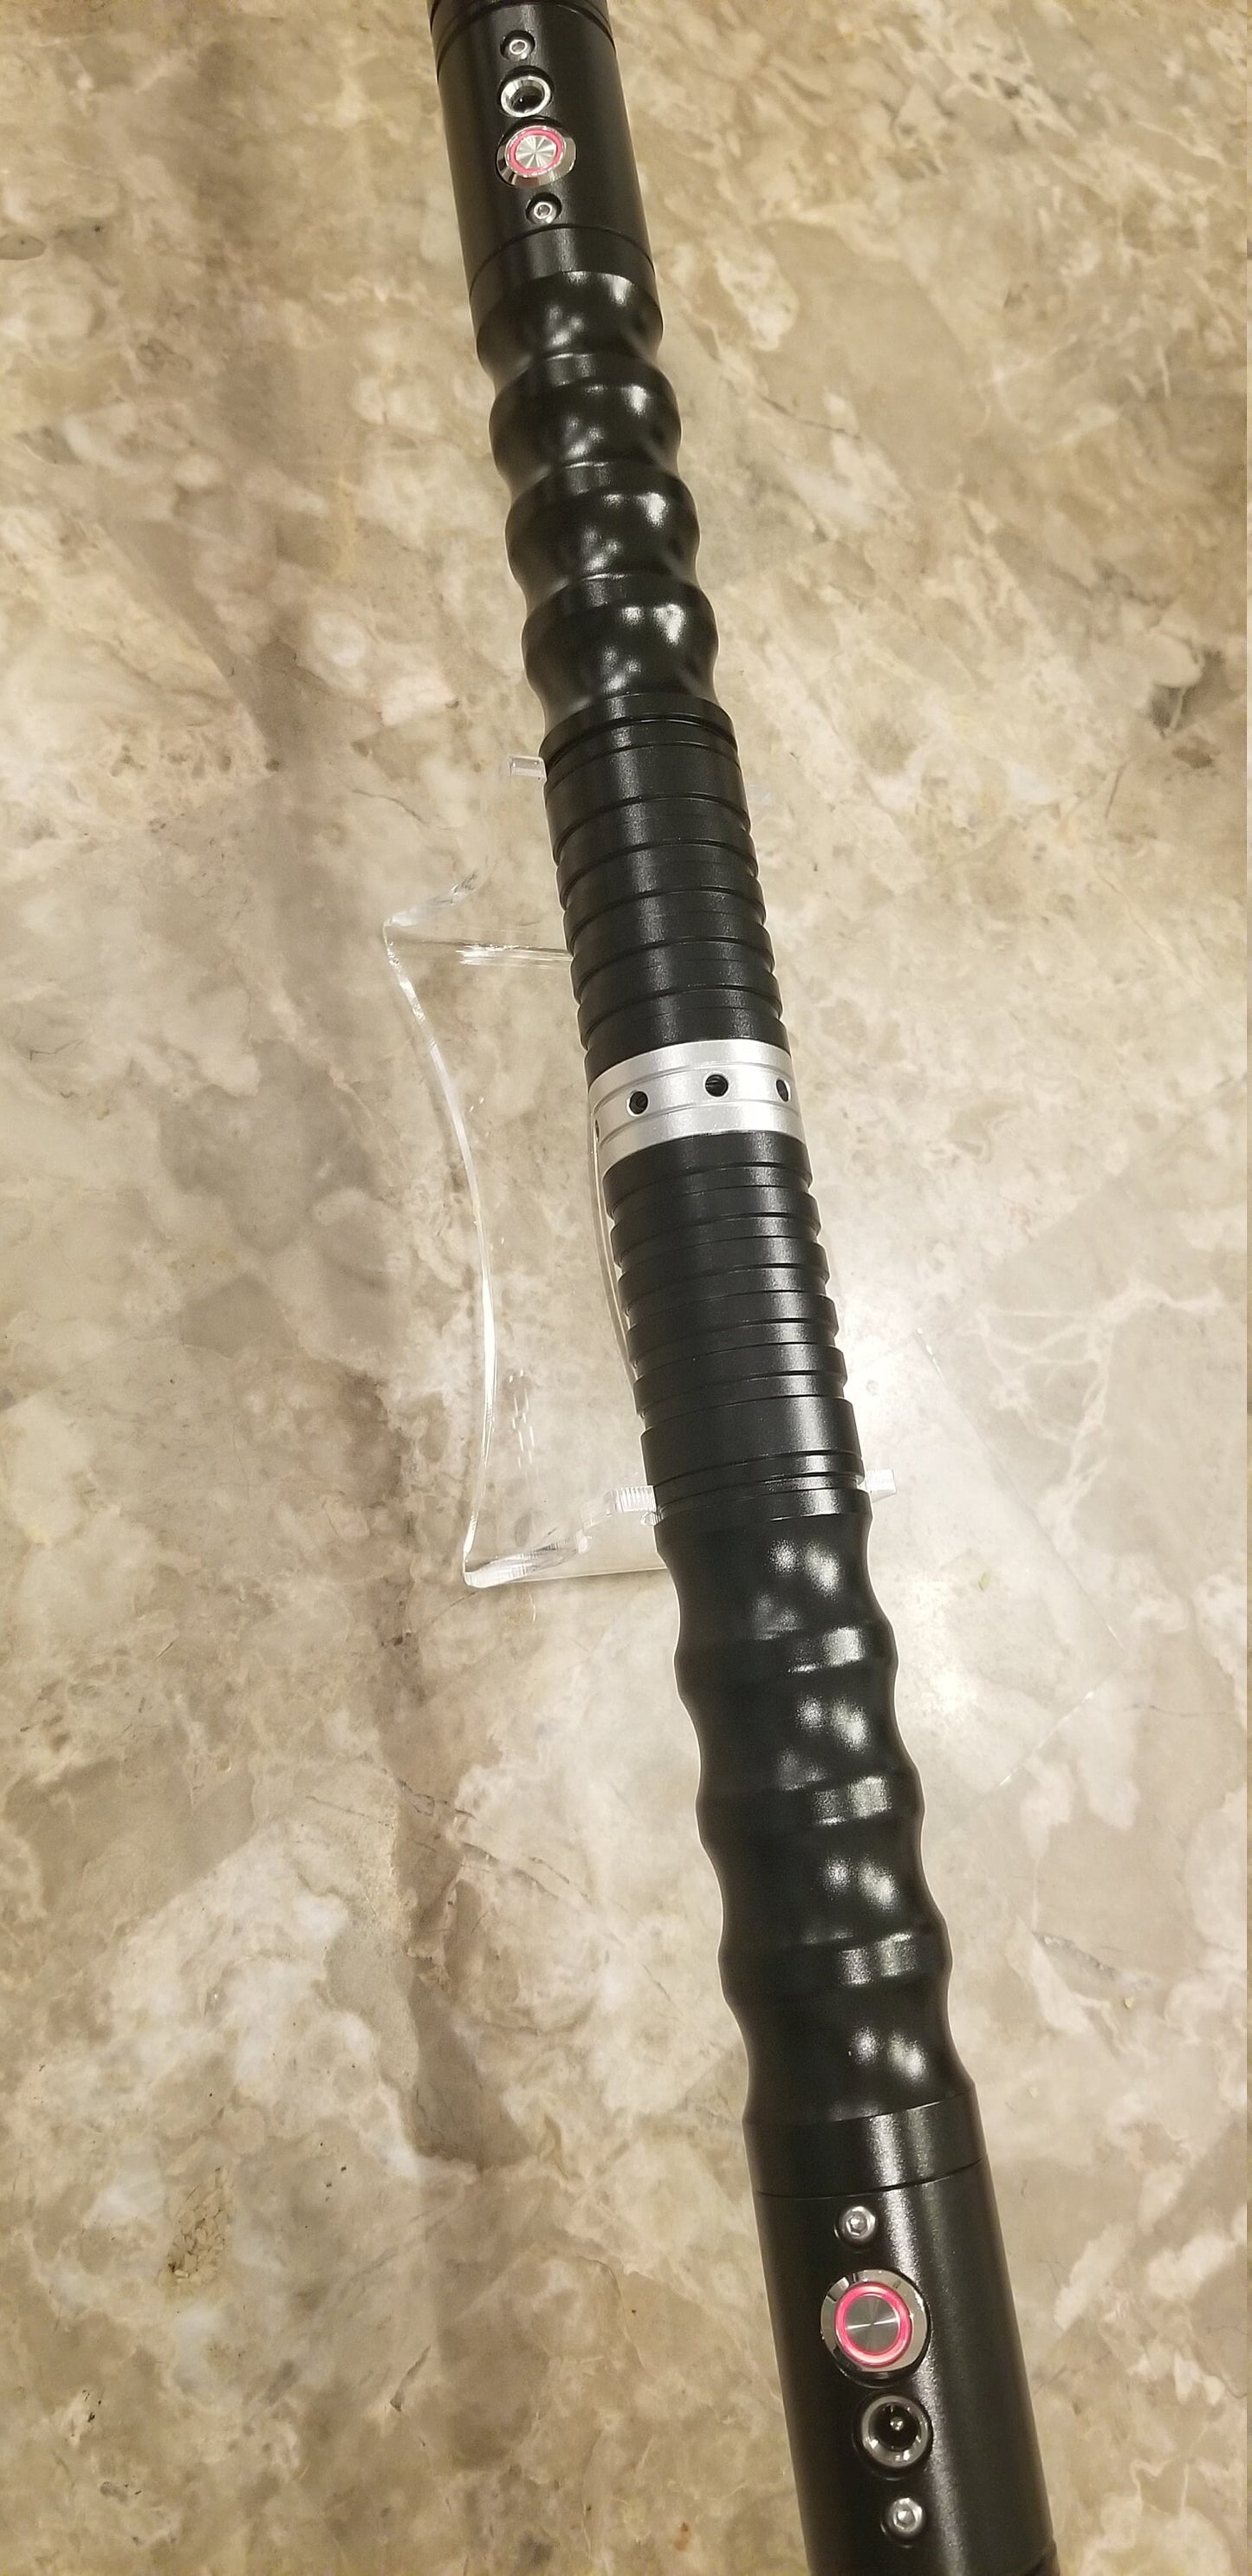 Lightsaber Coupling Adapter Sound Coupling Adapter Double Saber for our lightsabers with sound Extremely Durable Star Wars Bossaber